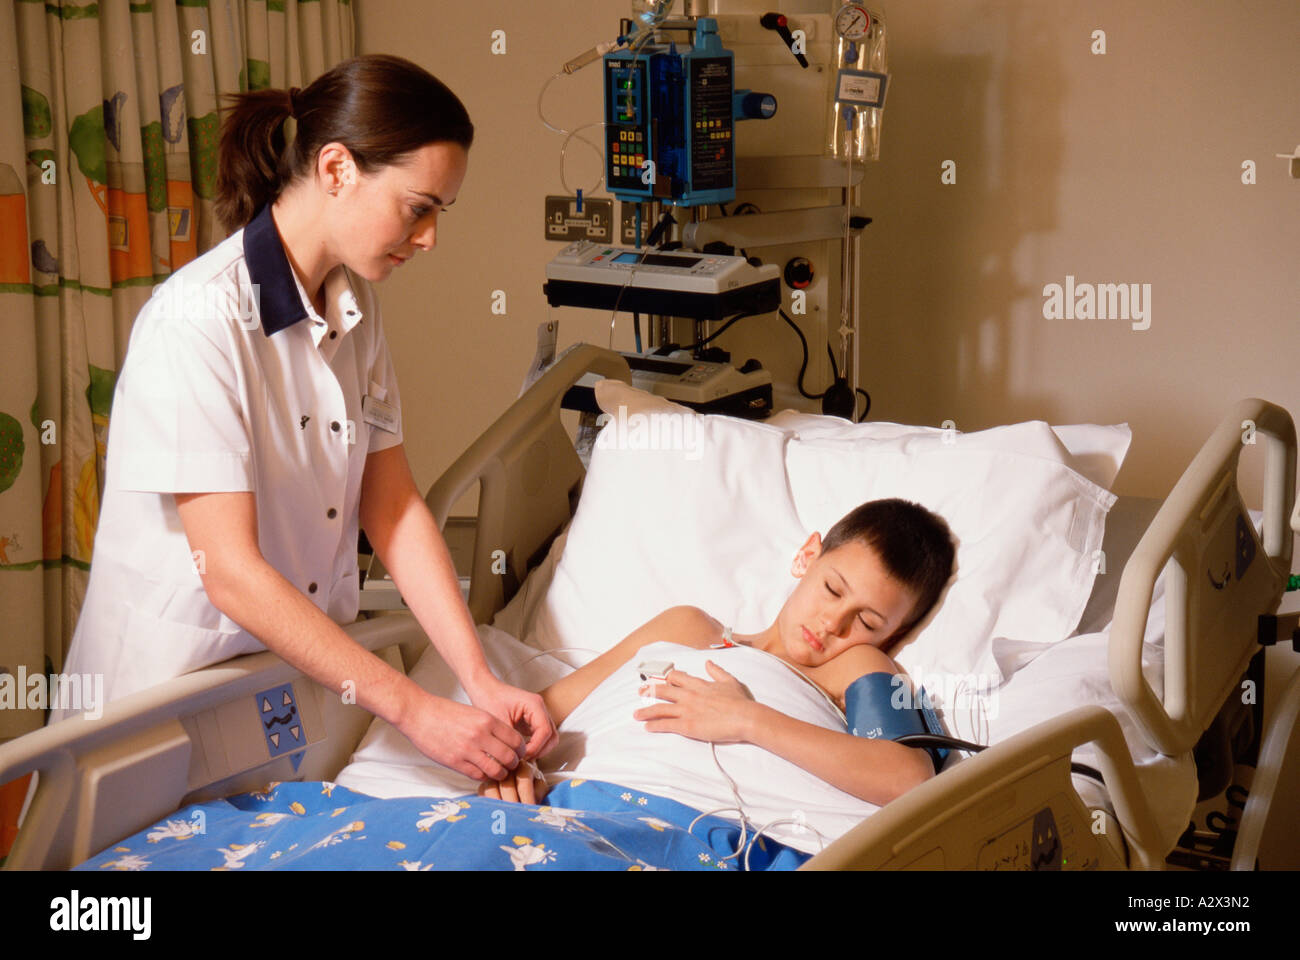 Hospital. Paediatrics. Paediatrician. Intensive care nurse at bedside of young boy patient. Stock Photo